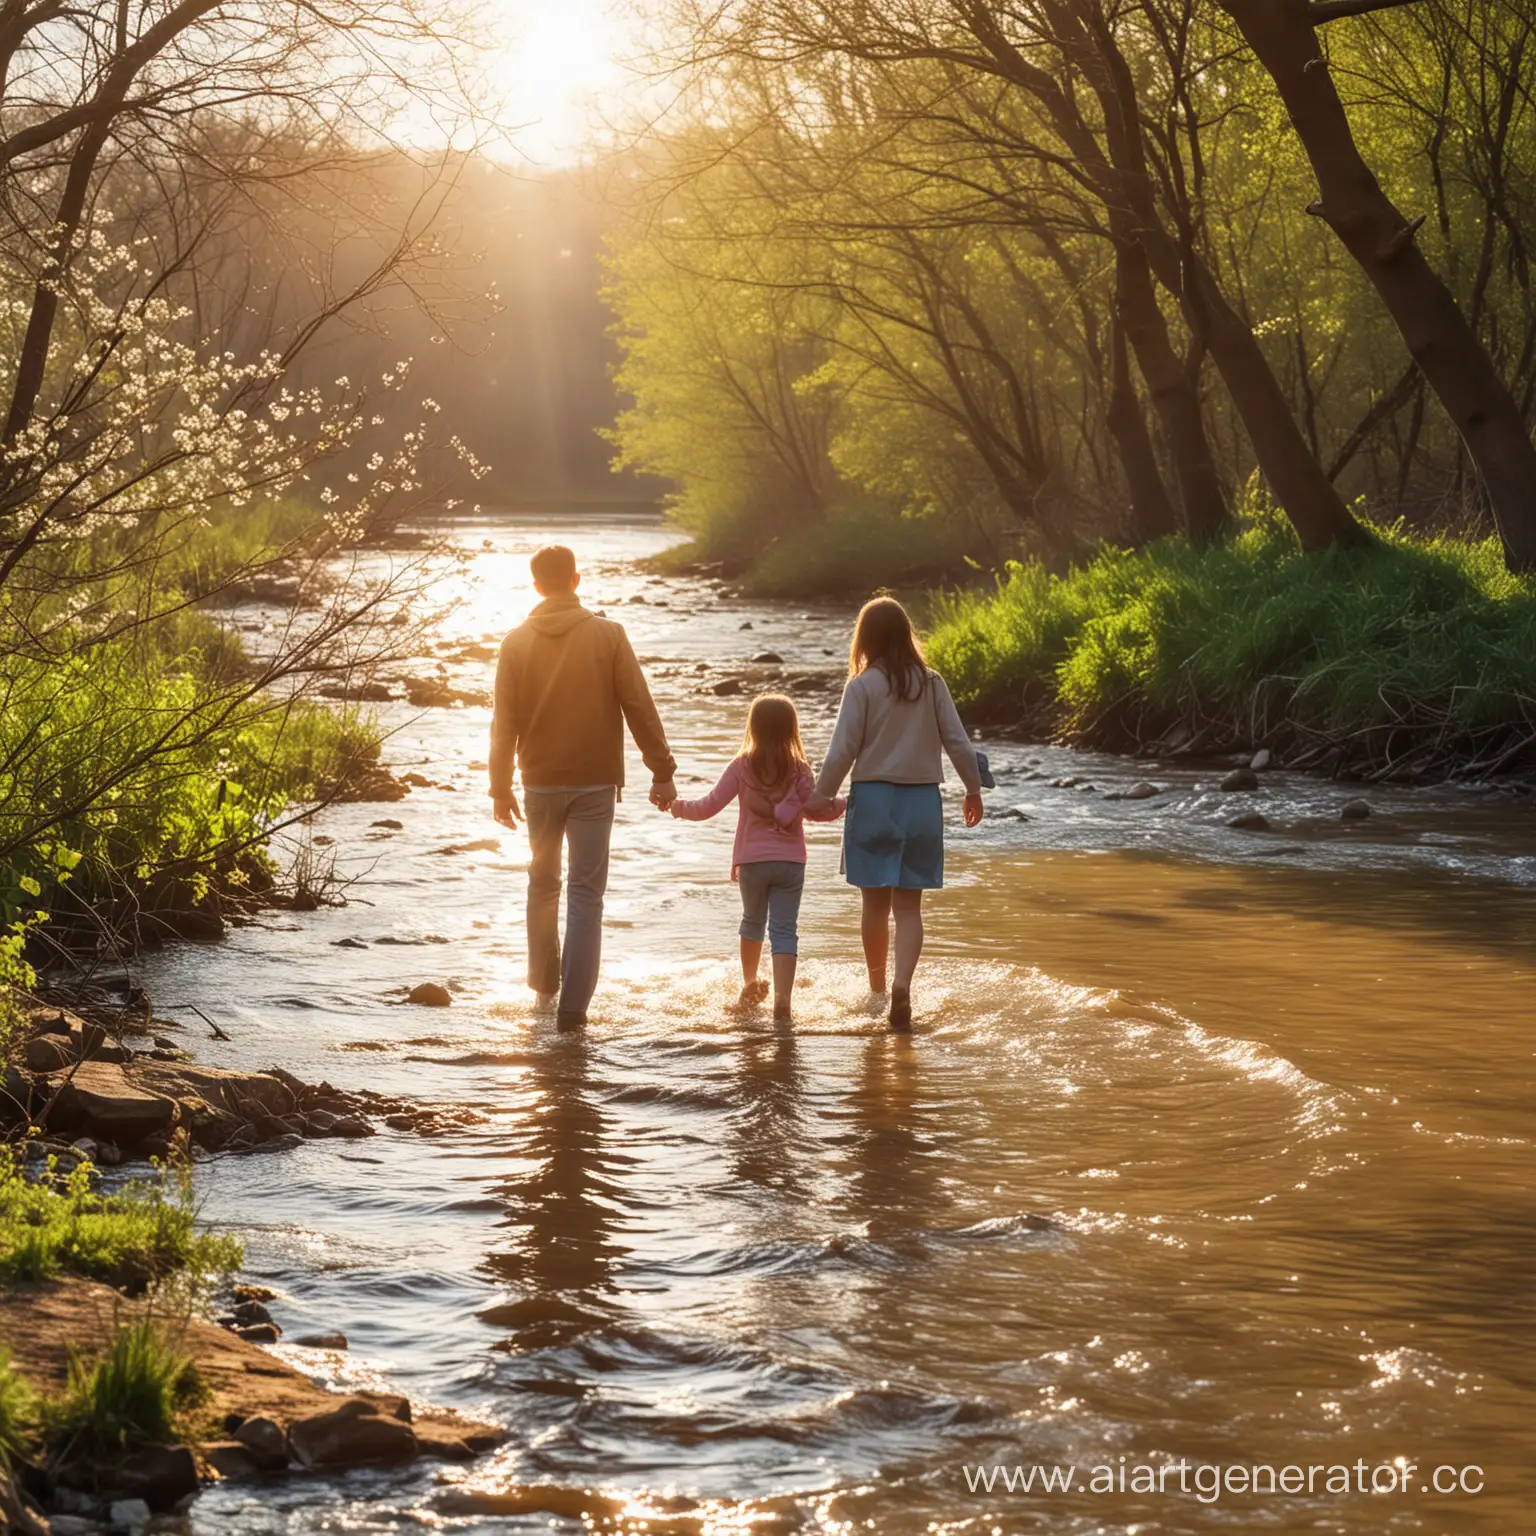 Joyful-Spring-River-Adventure-for-a-Happy-Family